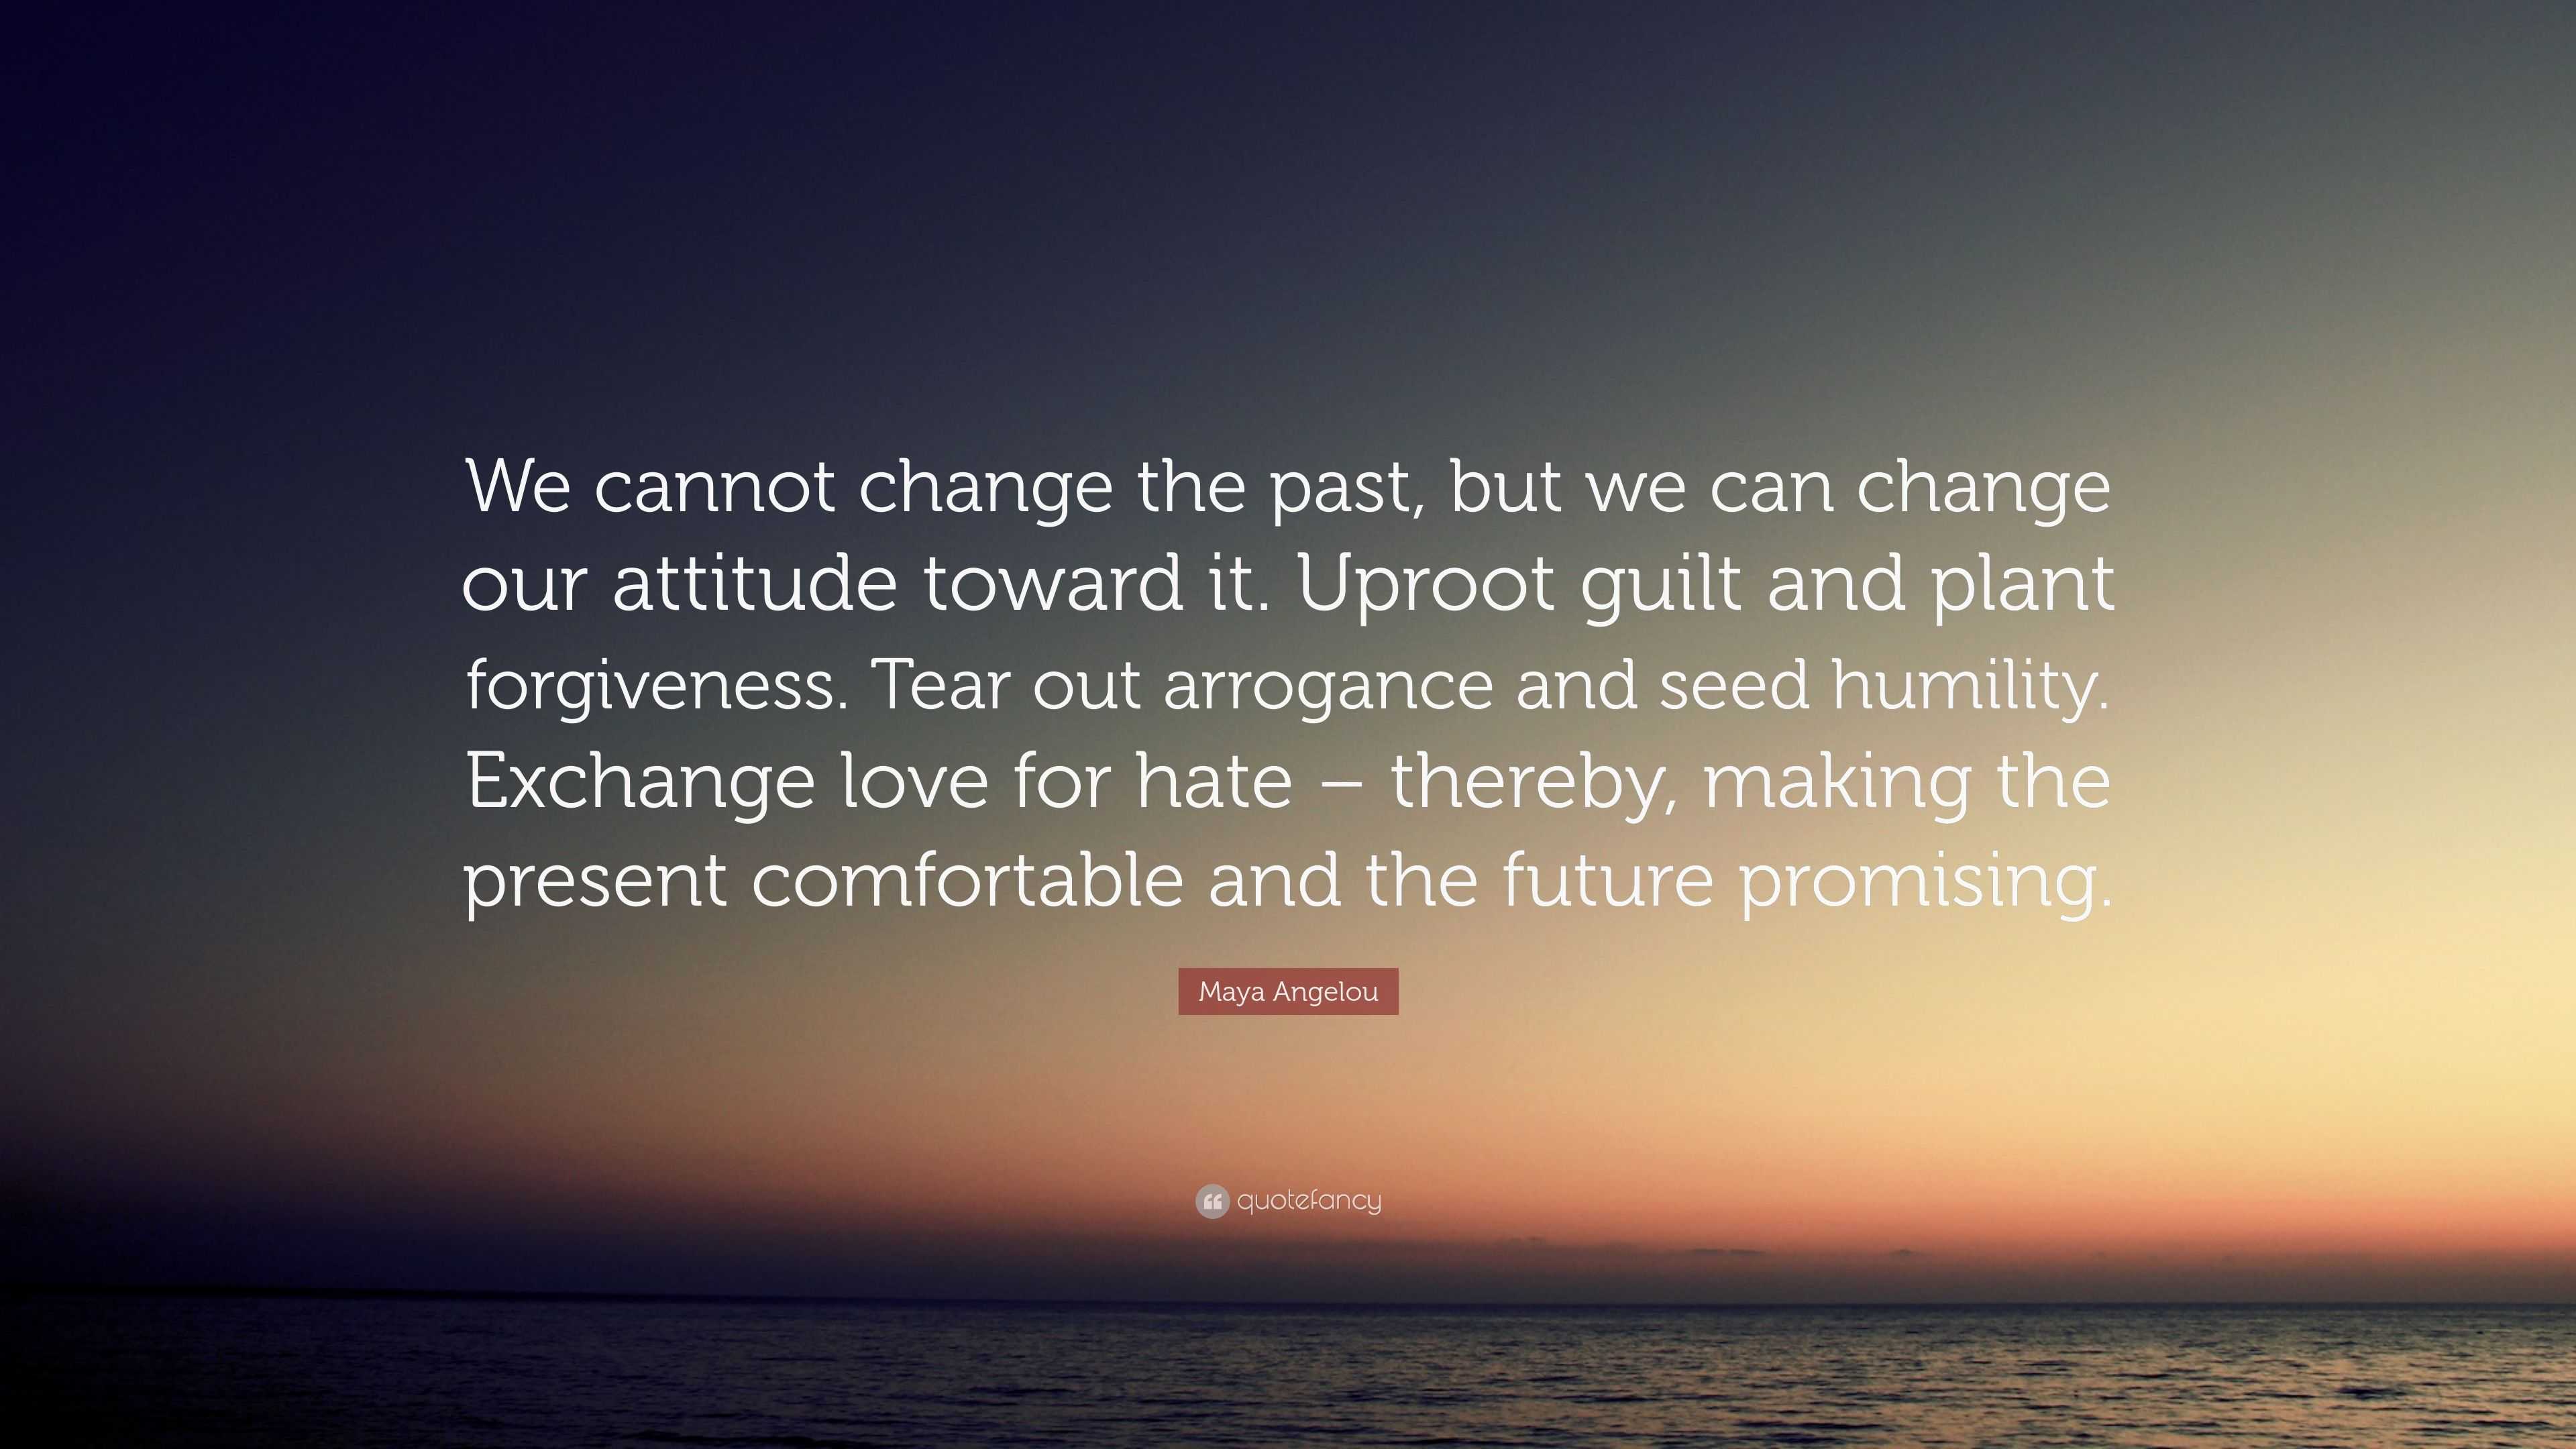 Maya Angelou Quote We Cannot Change The Past But We Can Change Our Attitude Toward It Uproot Guilt And Plant Forgiveness Tear Out Arroga